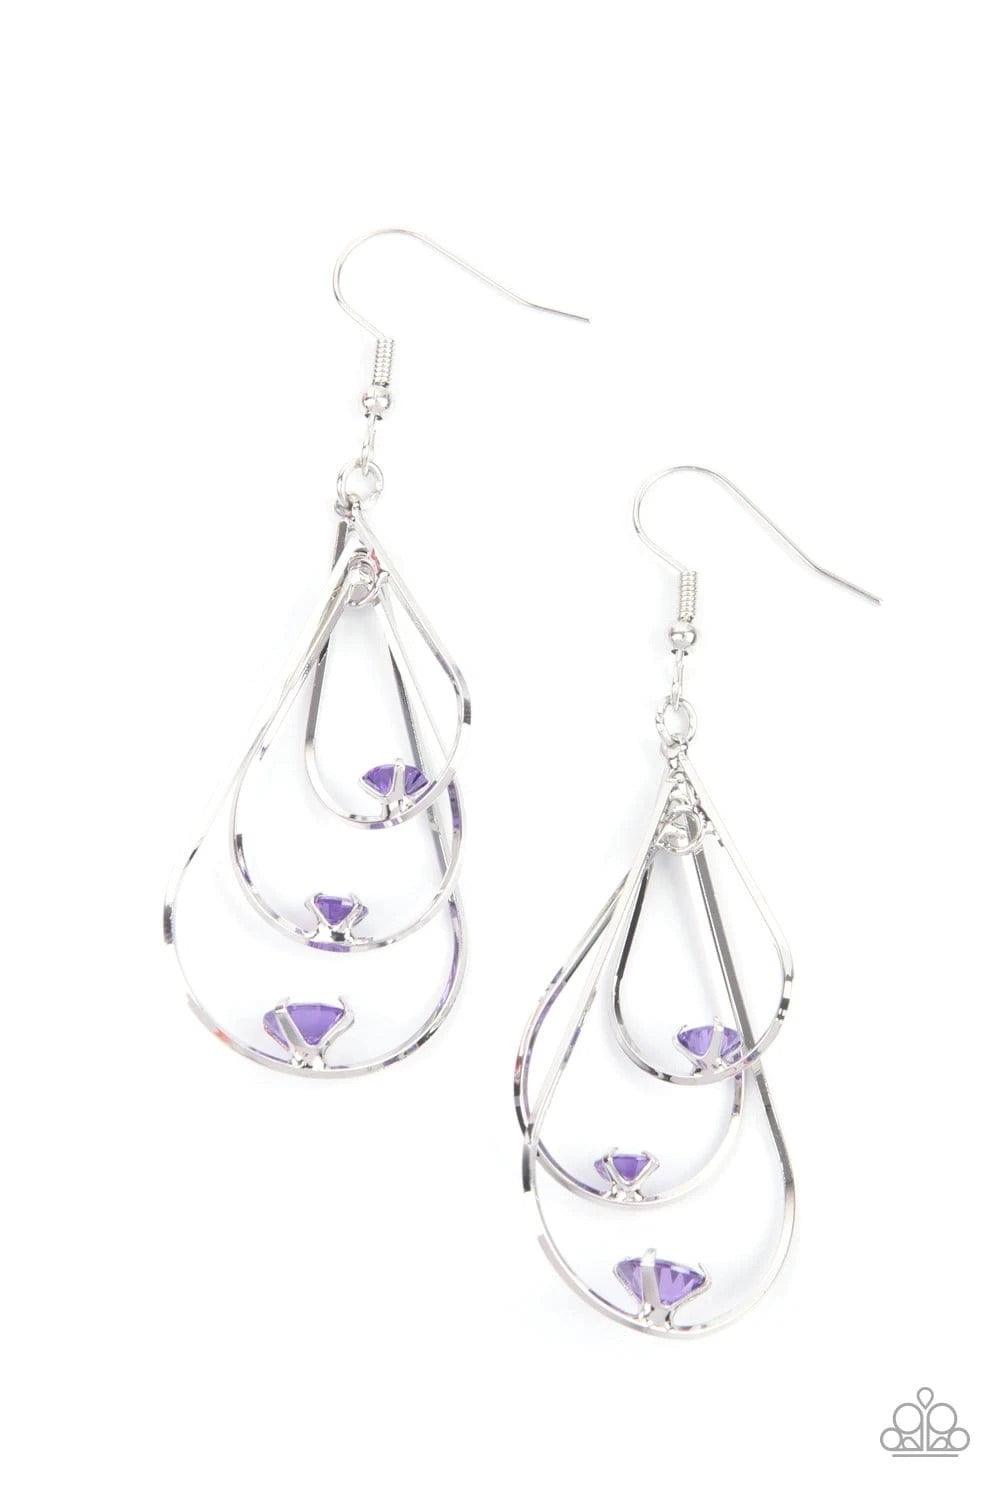 Paparazzi Accessories Drop Down Dazzle - Purple Gradually increasing in size, lavender rhinestones are fitted in place atop the bottom centers of three interlocking silver teardrops, creating a glamorous lure. Earring attaches to a standard fishhook fitti